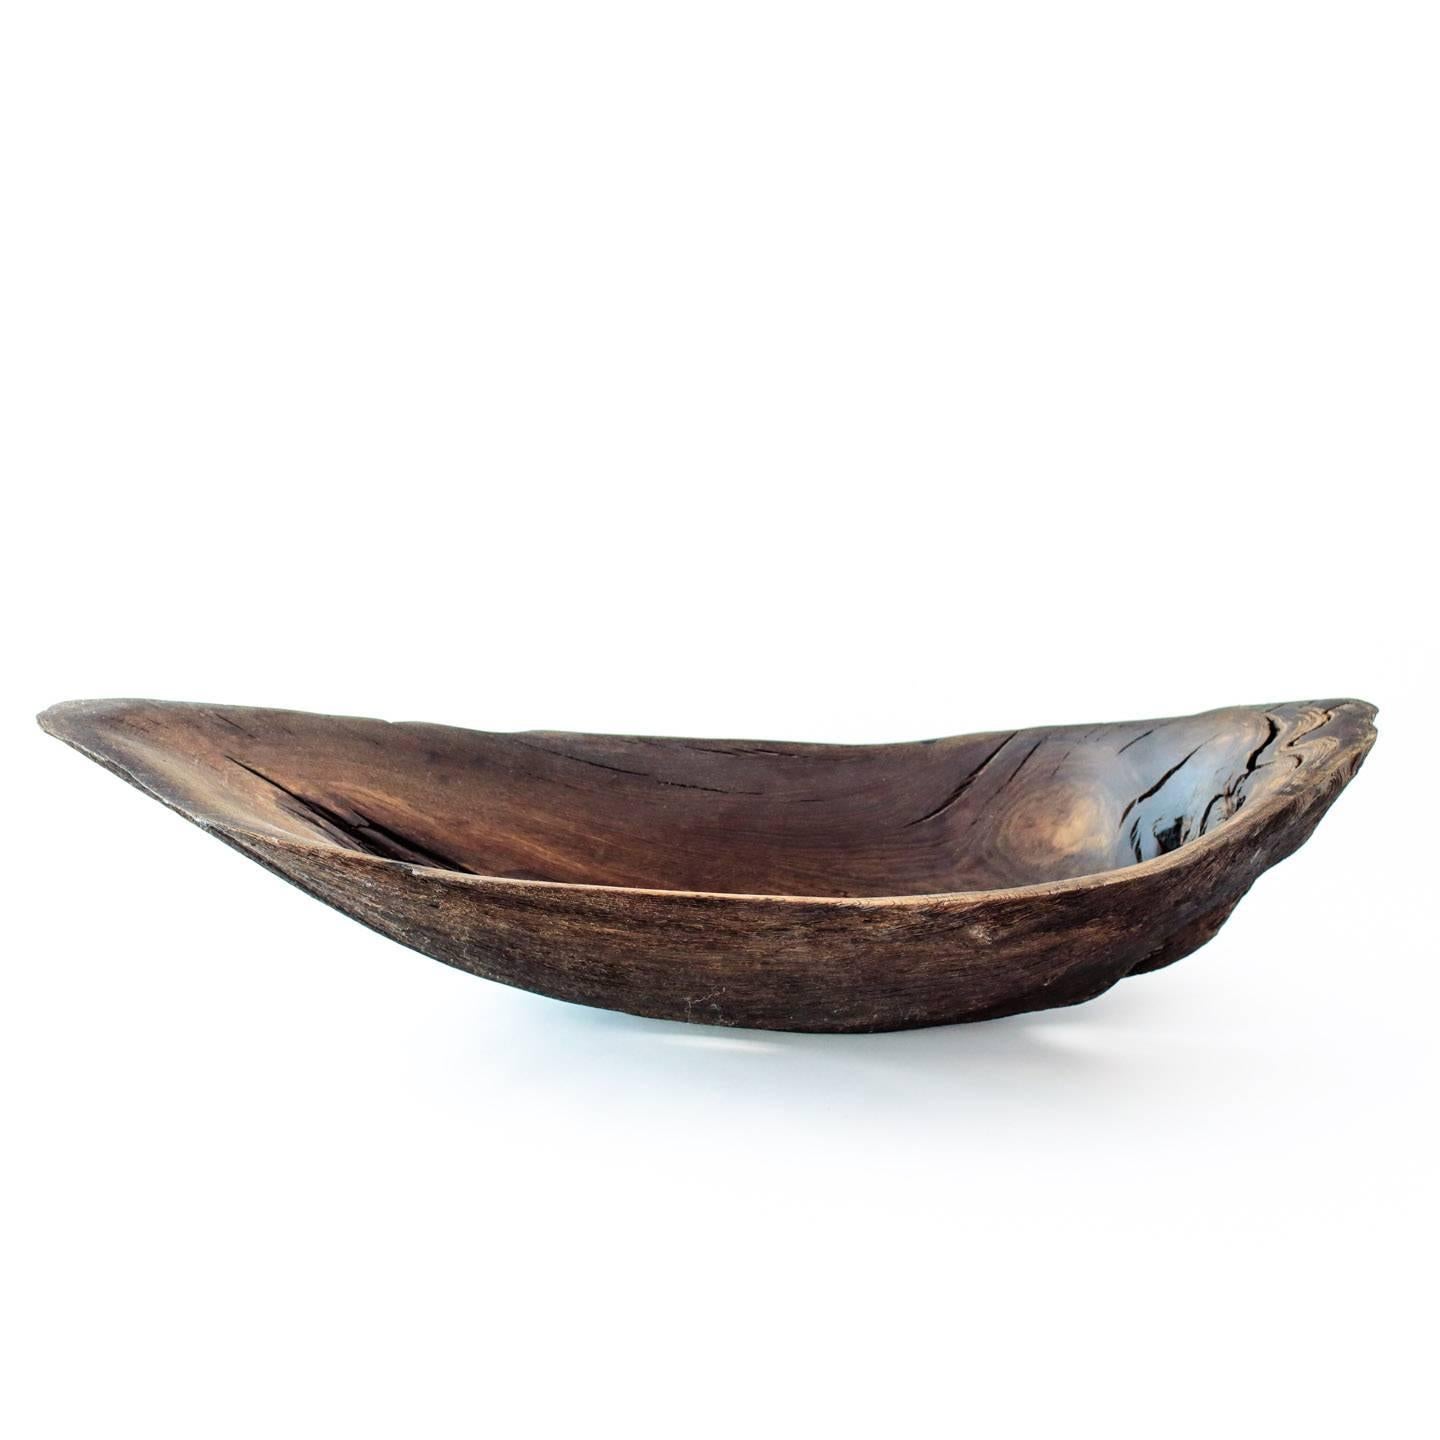 Bog-oak sculpted vessel by renowned British artist Adrian Swinstead.

Bog-oak is the timber from oak trees that have been buried in peat bogs and preserved from decay by the acidic and anaerobic bog conditions, sometimes for hundreds or even